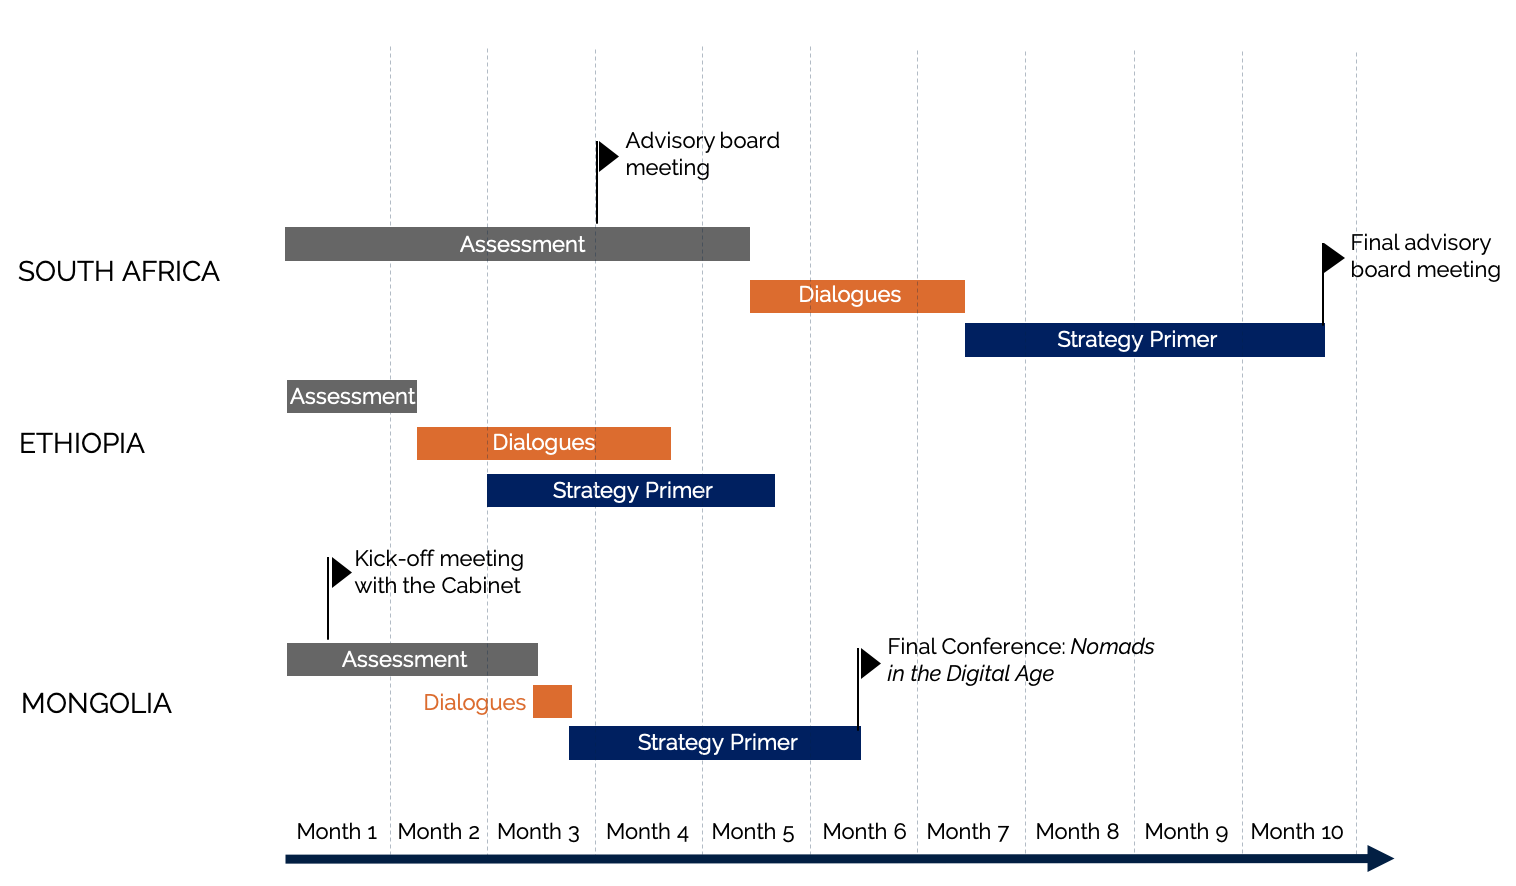 A diagram showing the timeline of Toolkit implementation for Ethiopia, Mongolia, and South Africa